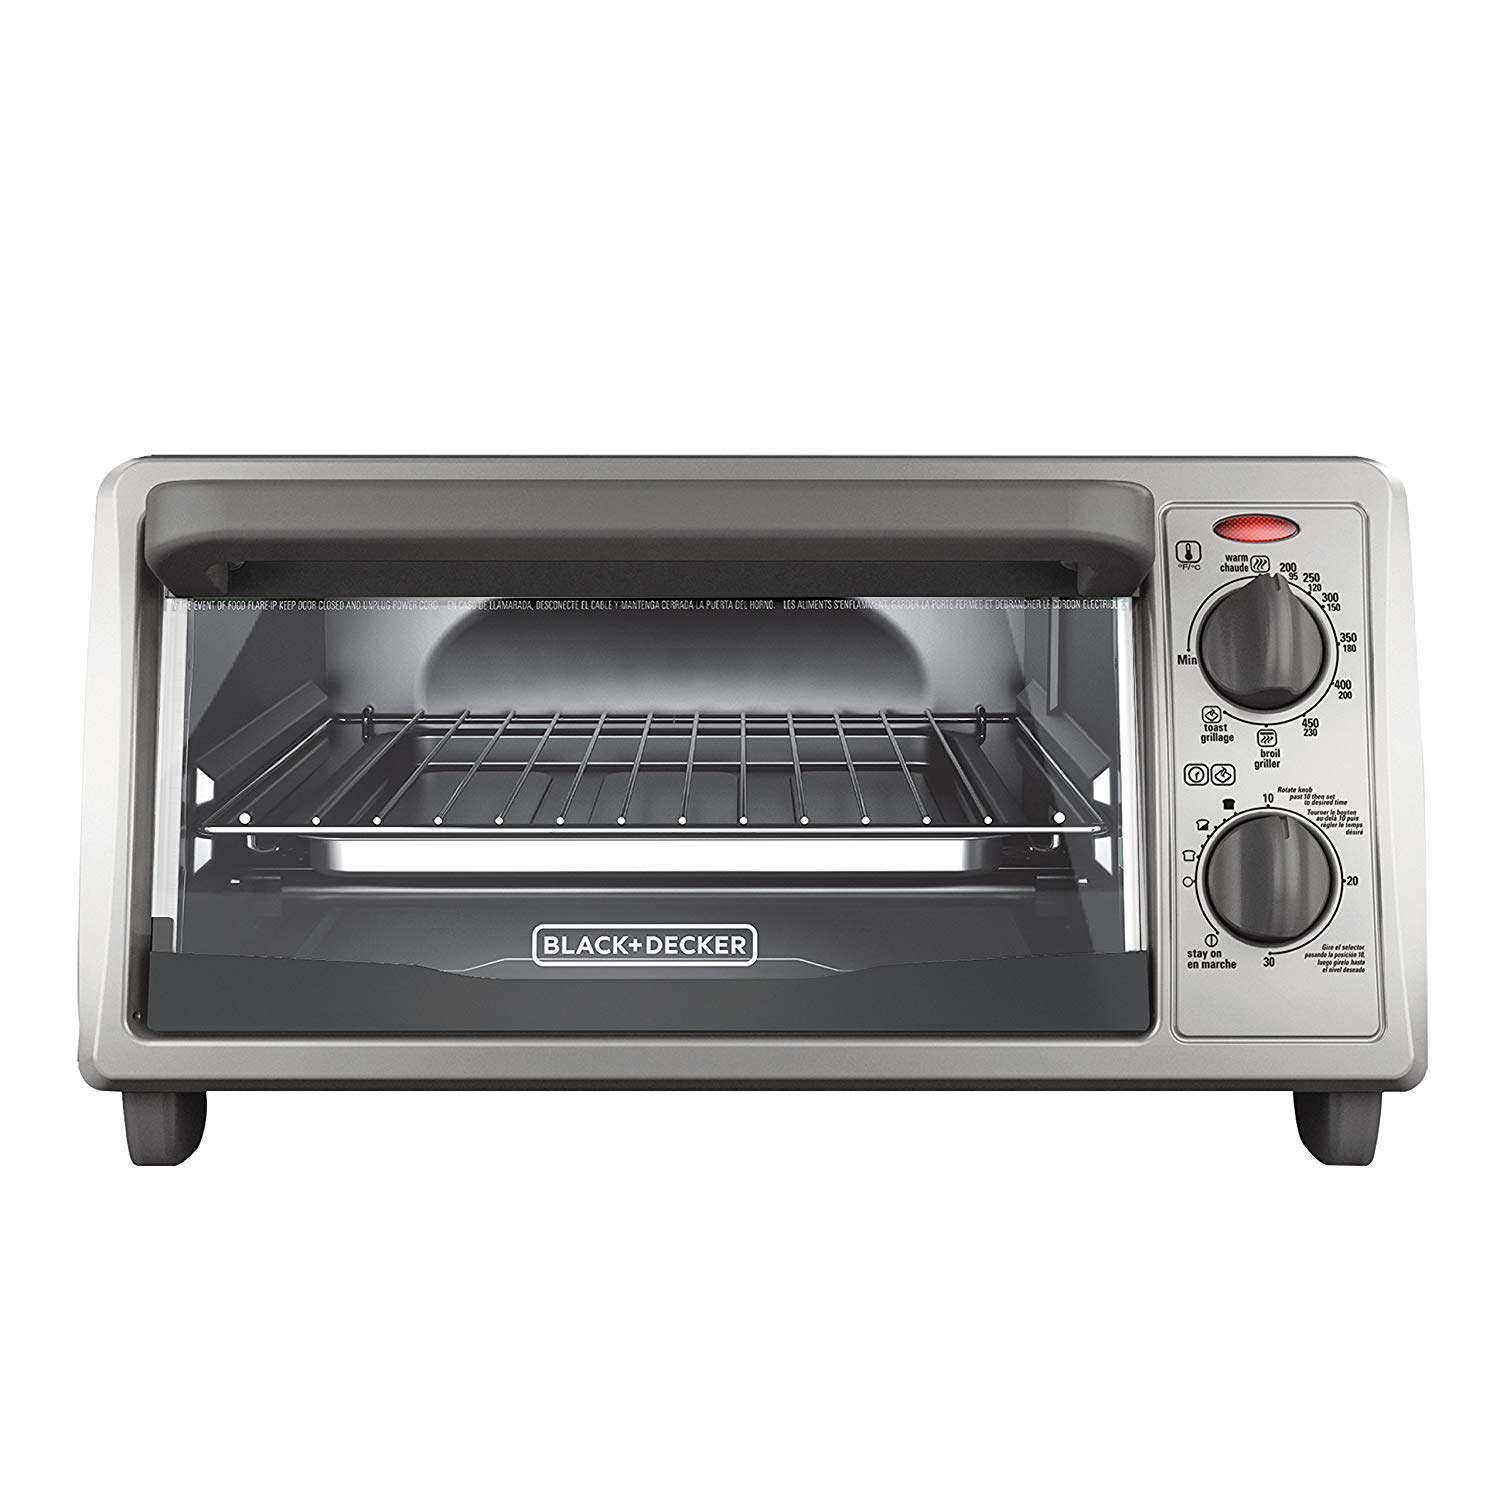 An image of Black and Decker TO1322SBD Silver Countertop Compact Four Slice Toaster Oven